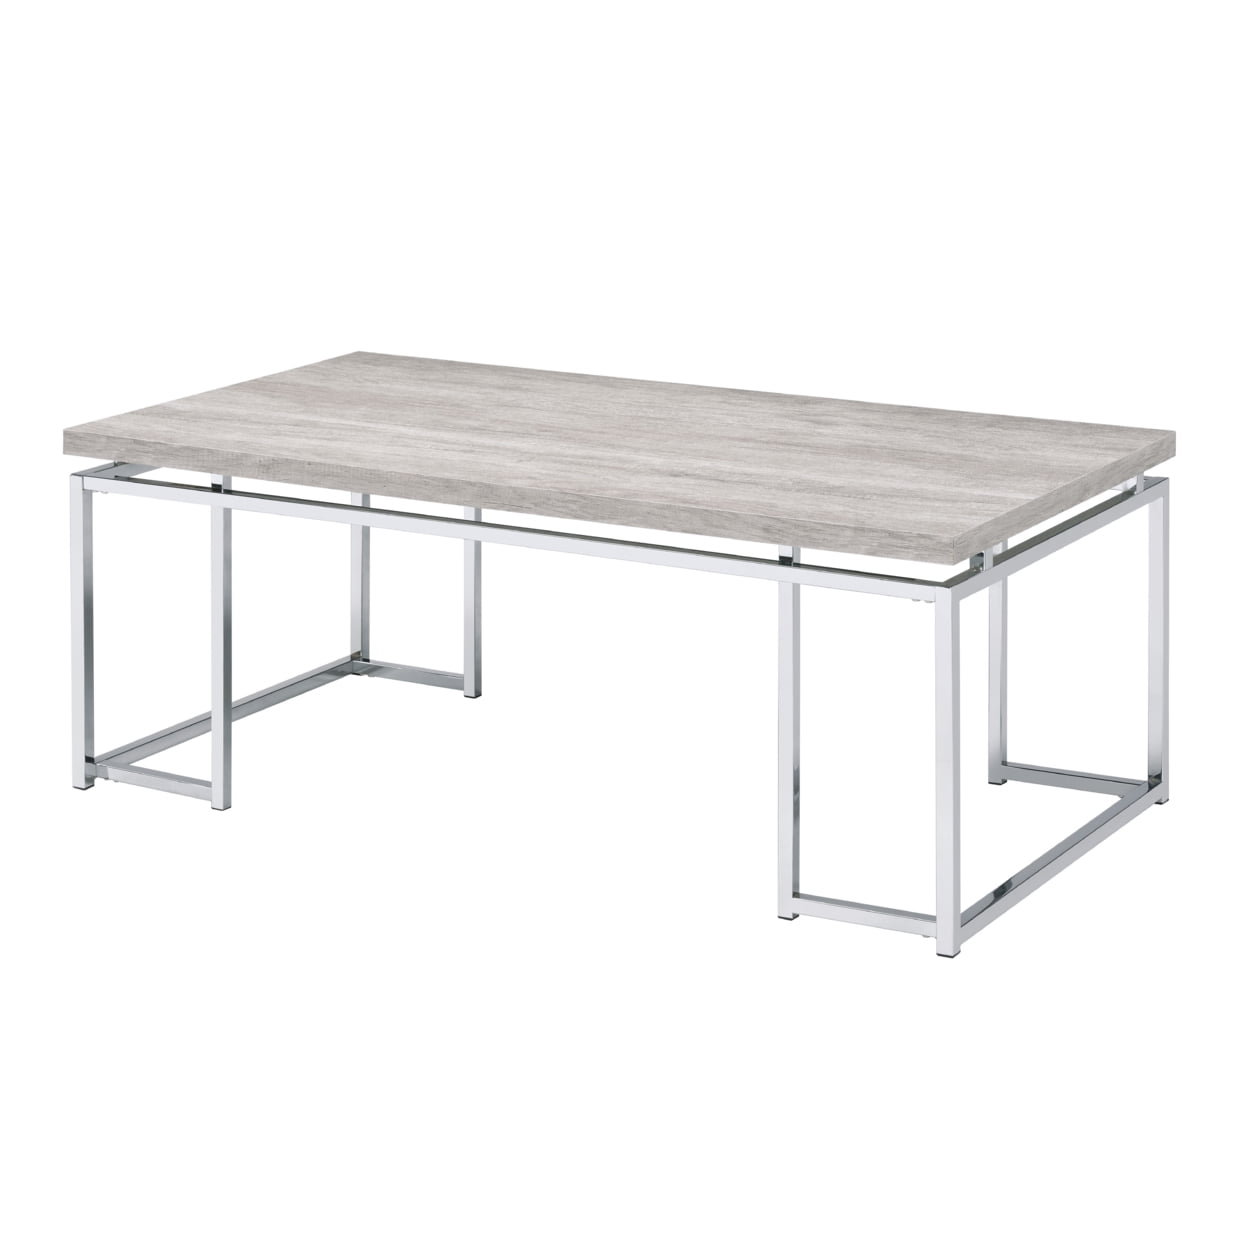 Bm209595 Coffee Table With Rectangular Tabletop & Metal Legs, Silver & Brown